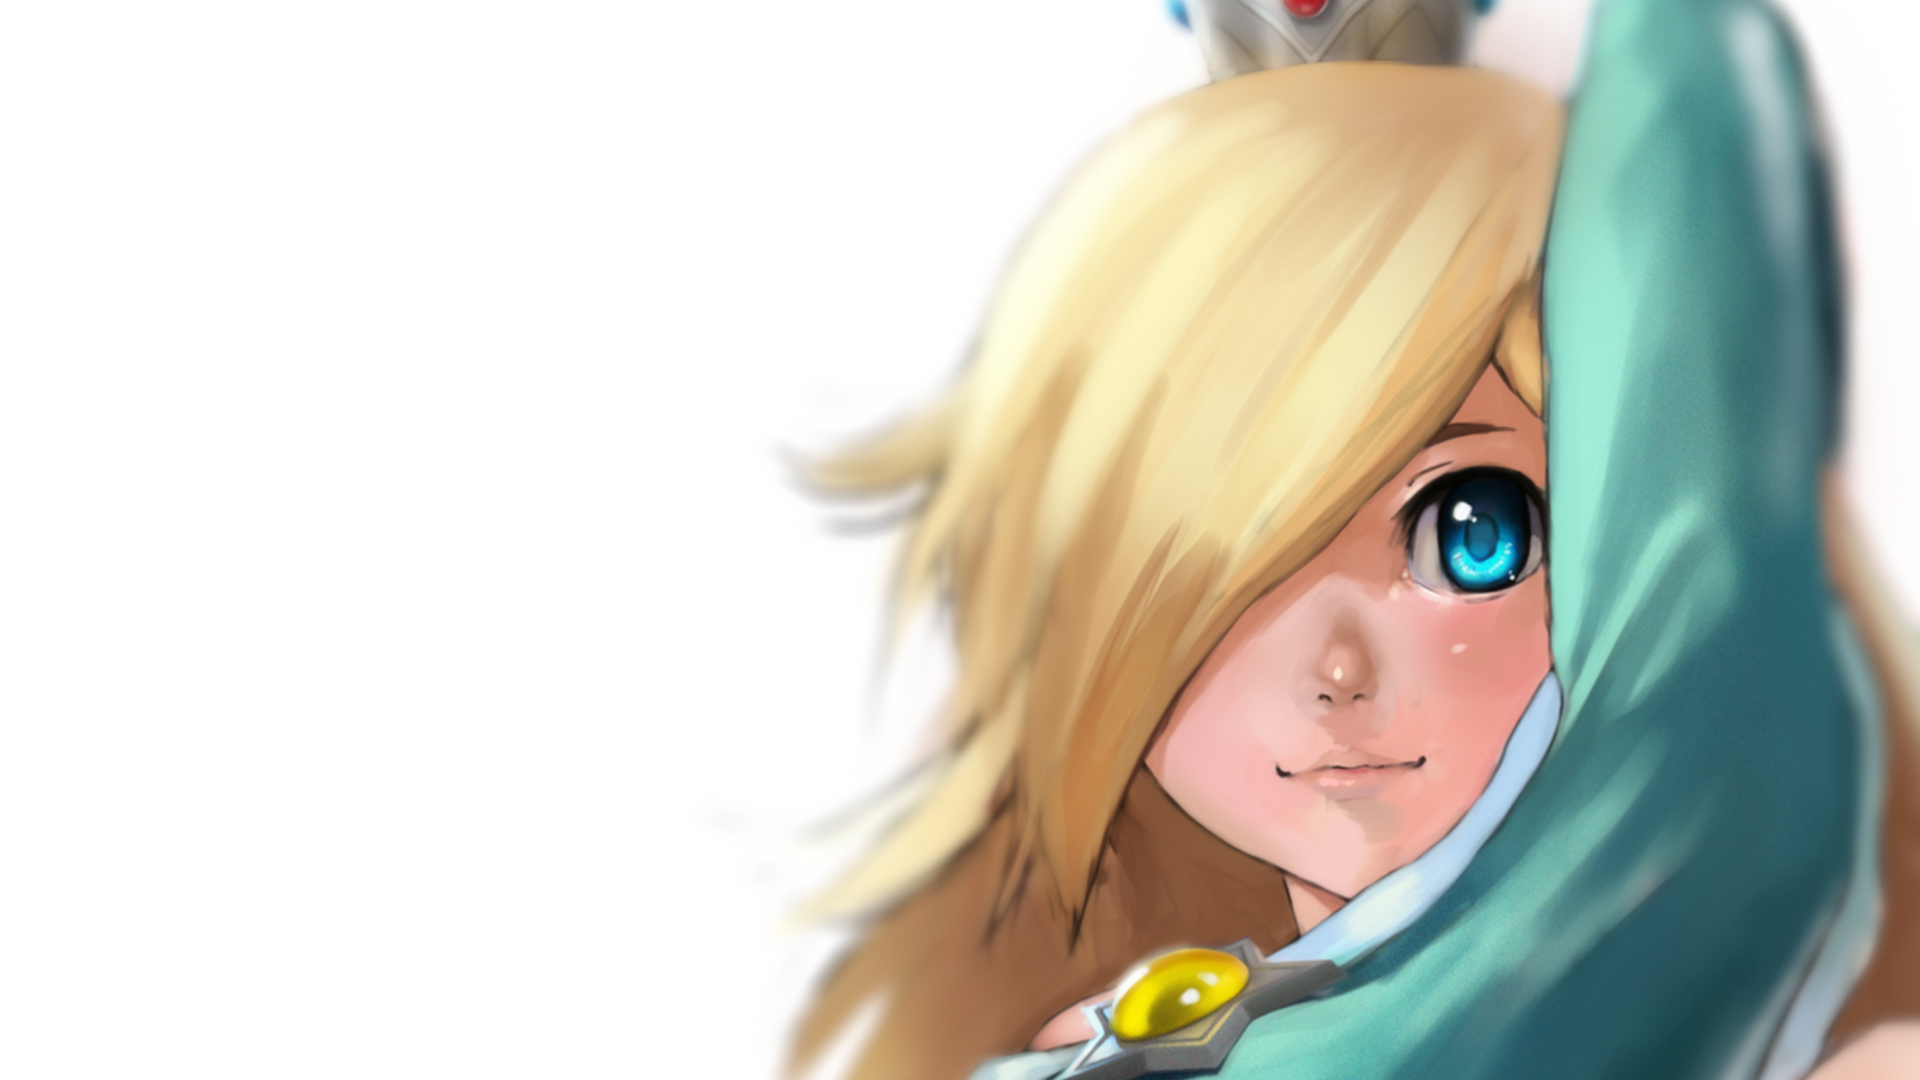 4 Rosalina HD Wallpapers | Backgrounds - Wallpaper Abyss